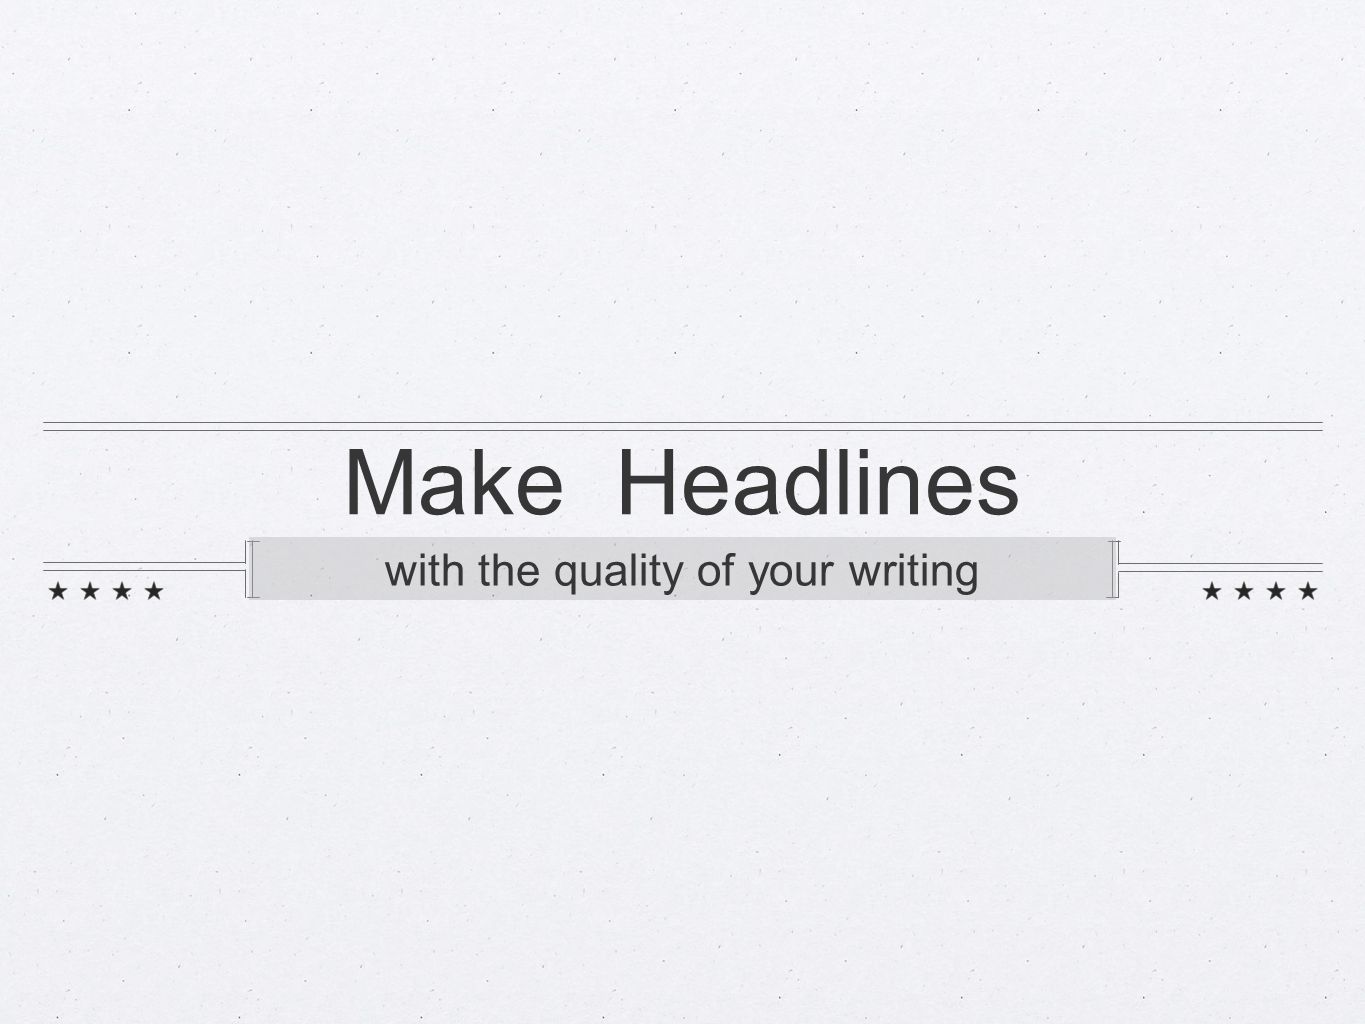 Make Headlines with the quality of your writing